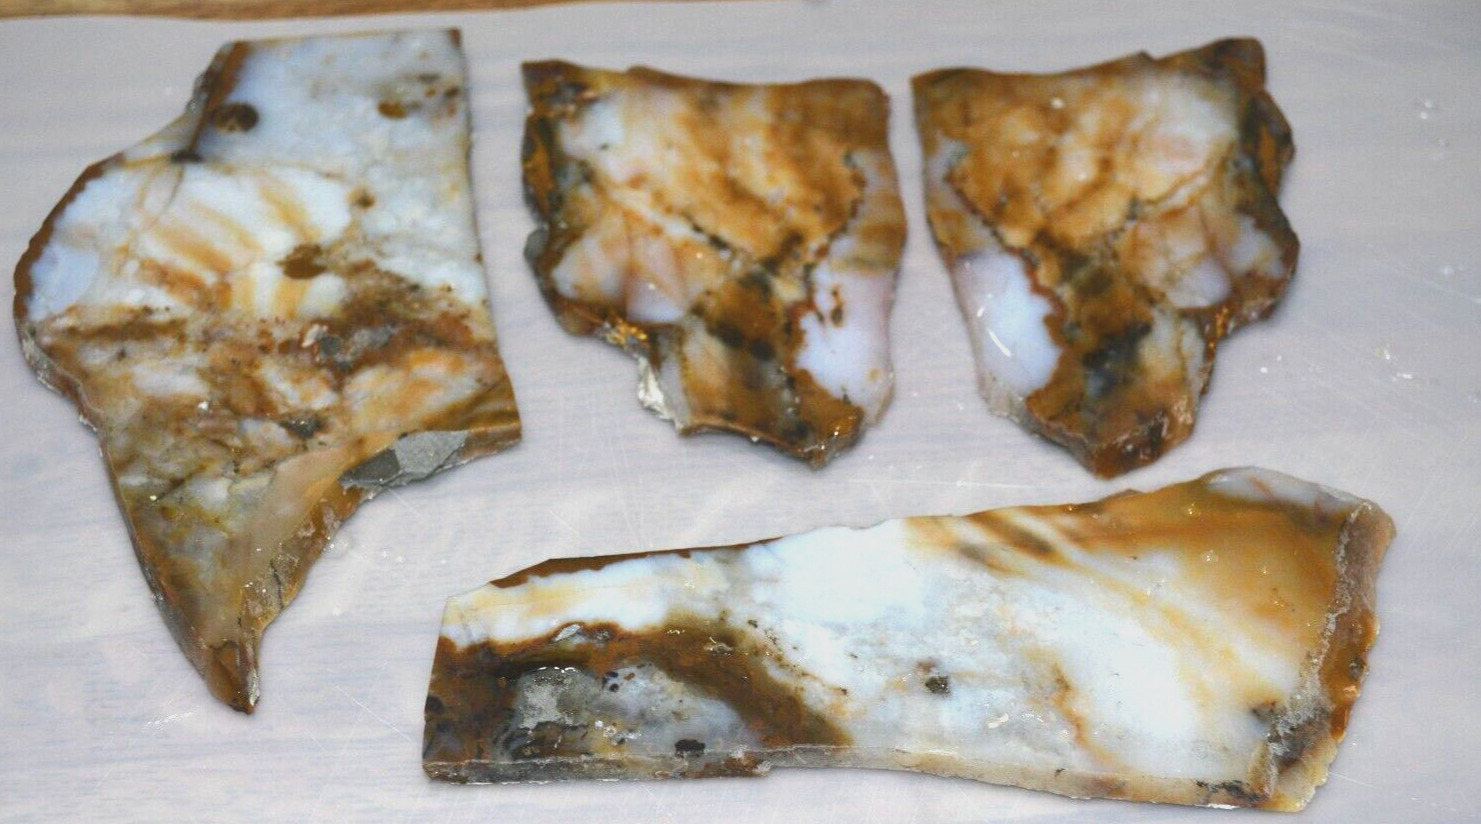 Polka Dot Agate Rough Slabs -Oregon 1 pound OLD STOCK 4 Slabs Lapidary Crafts